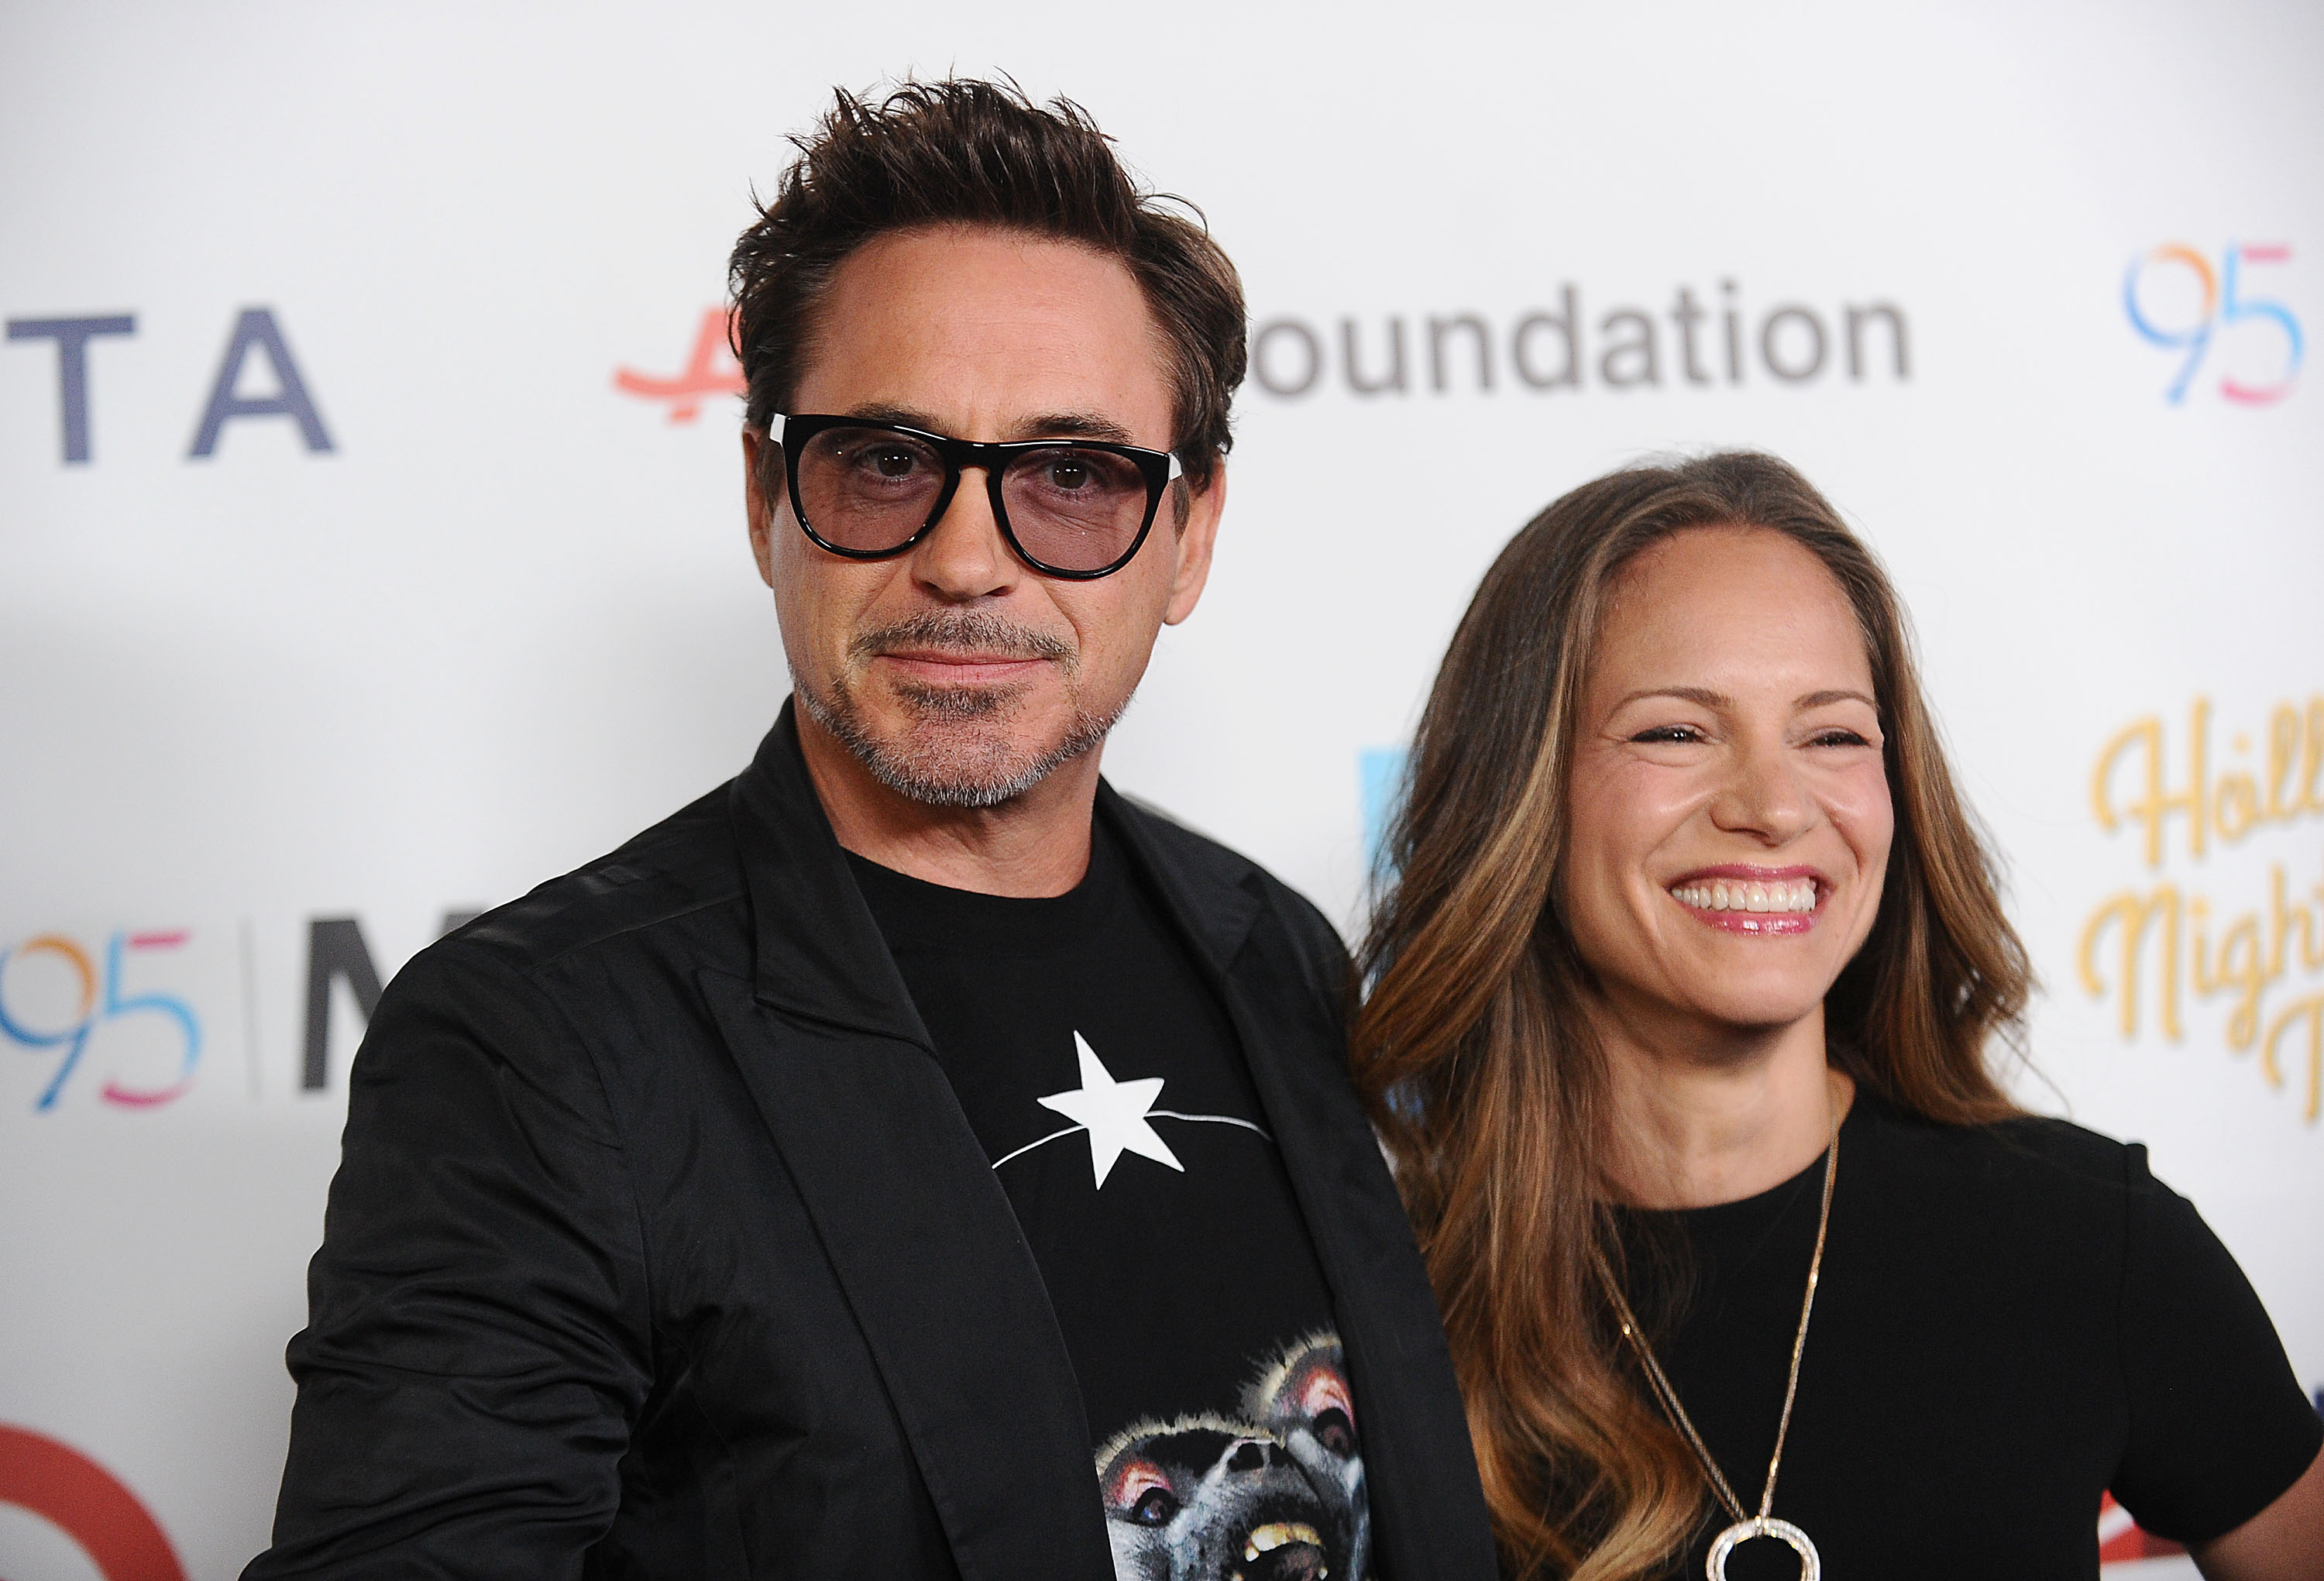 Robert Downey Jr. and his wife Susan in California in 2016 | Source: Getty Images